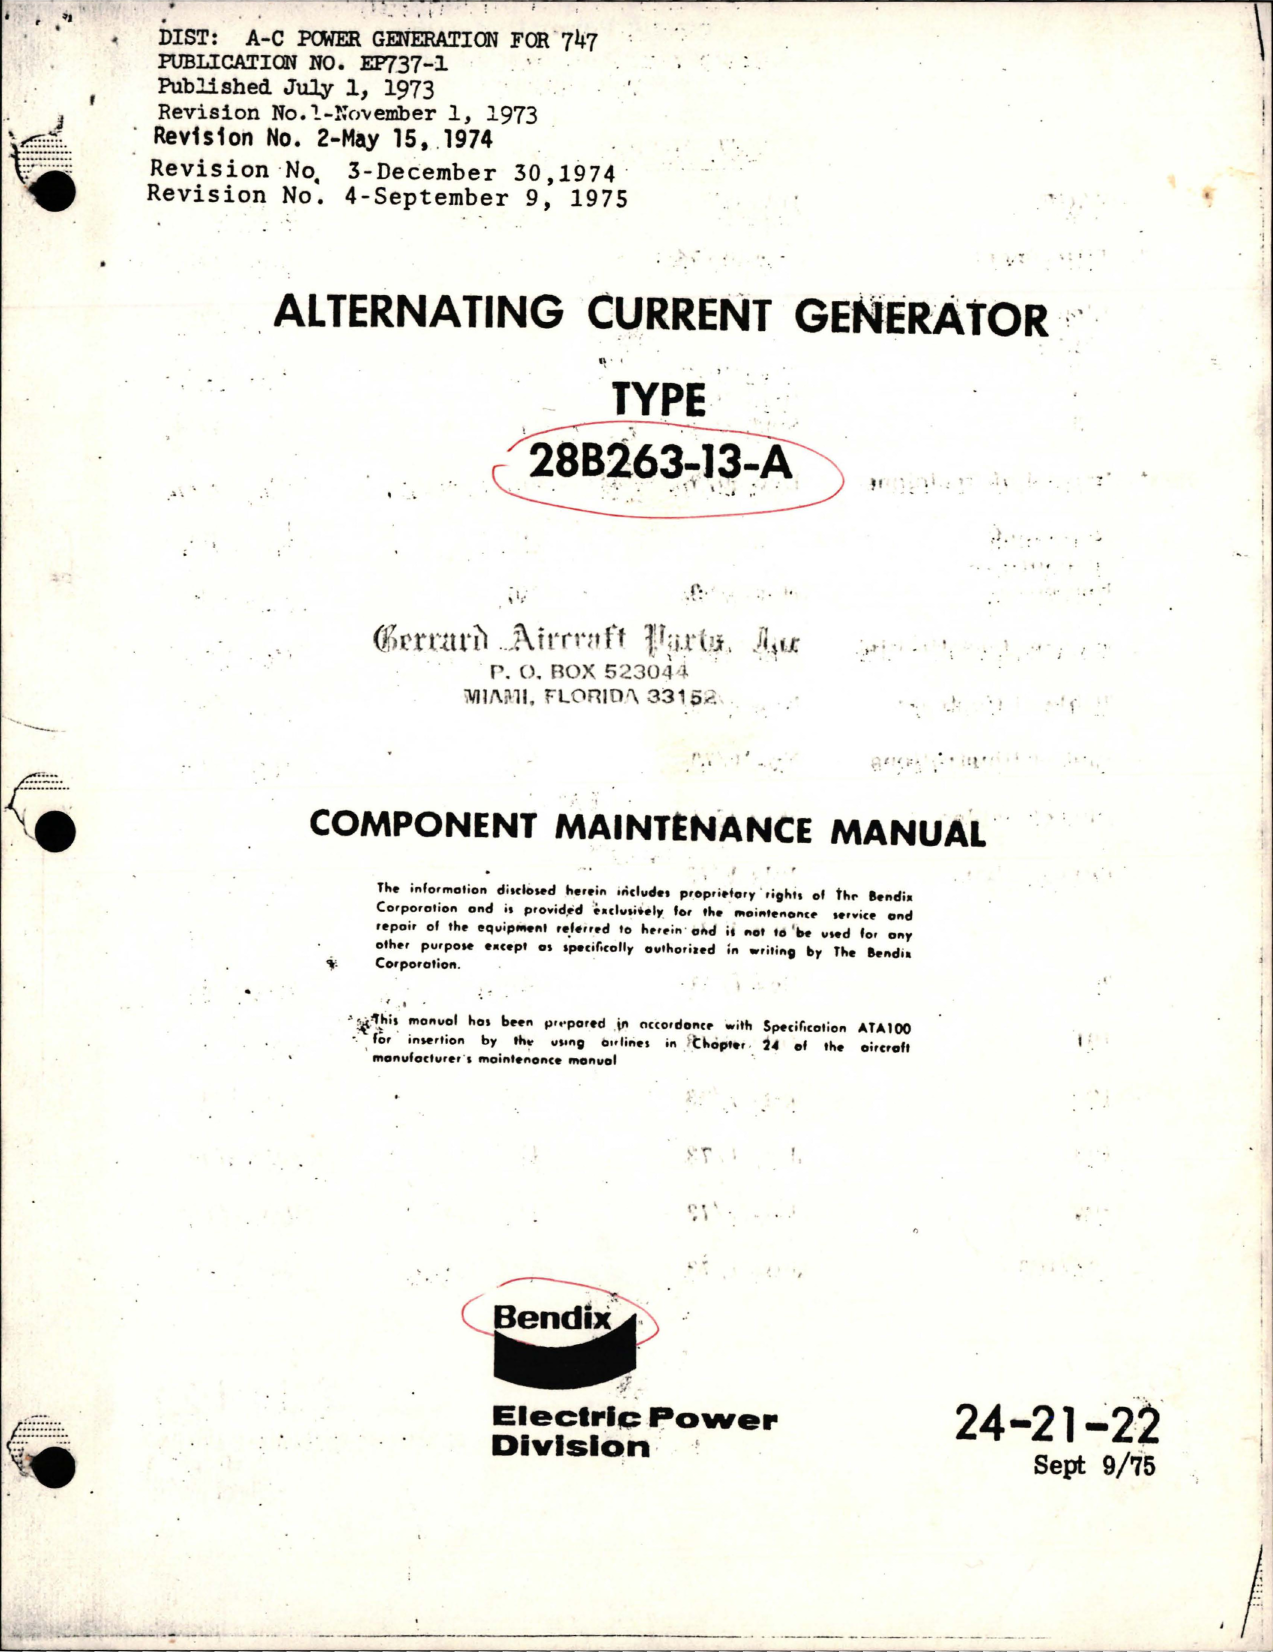 Sample page 1 from AirCorps Library document: Maintenance Manual for Alternating Current Generator - Type 28B263-13-A